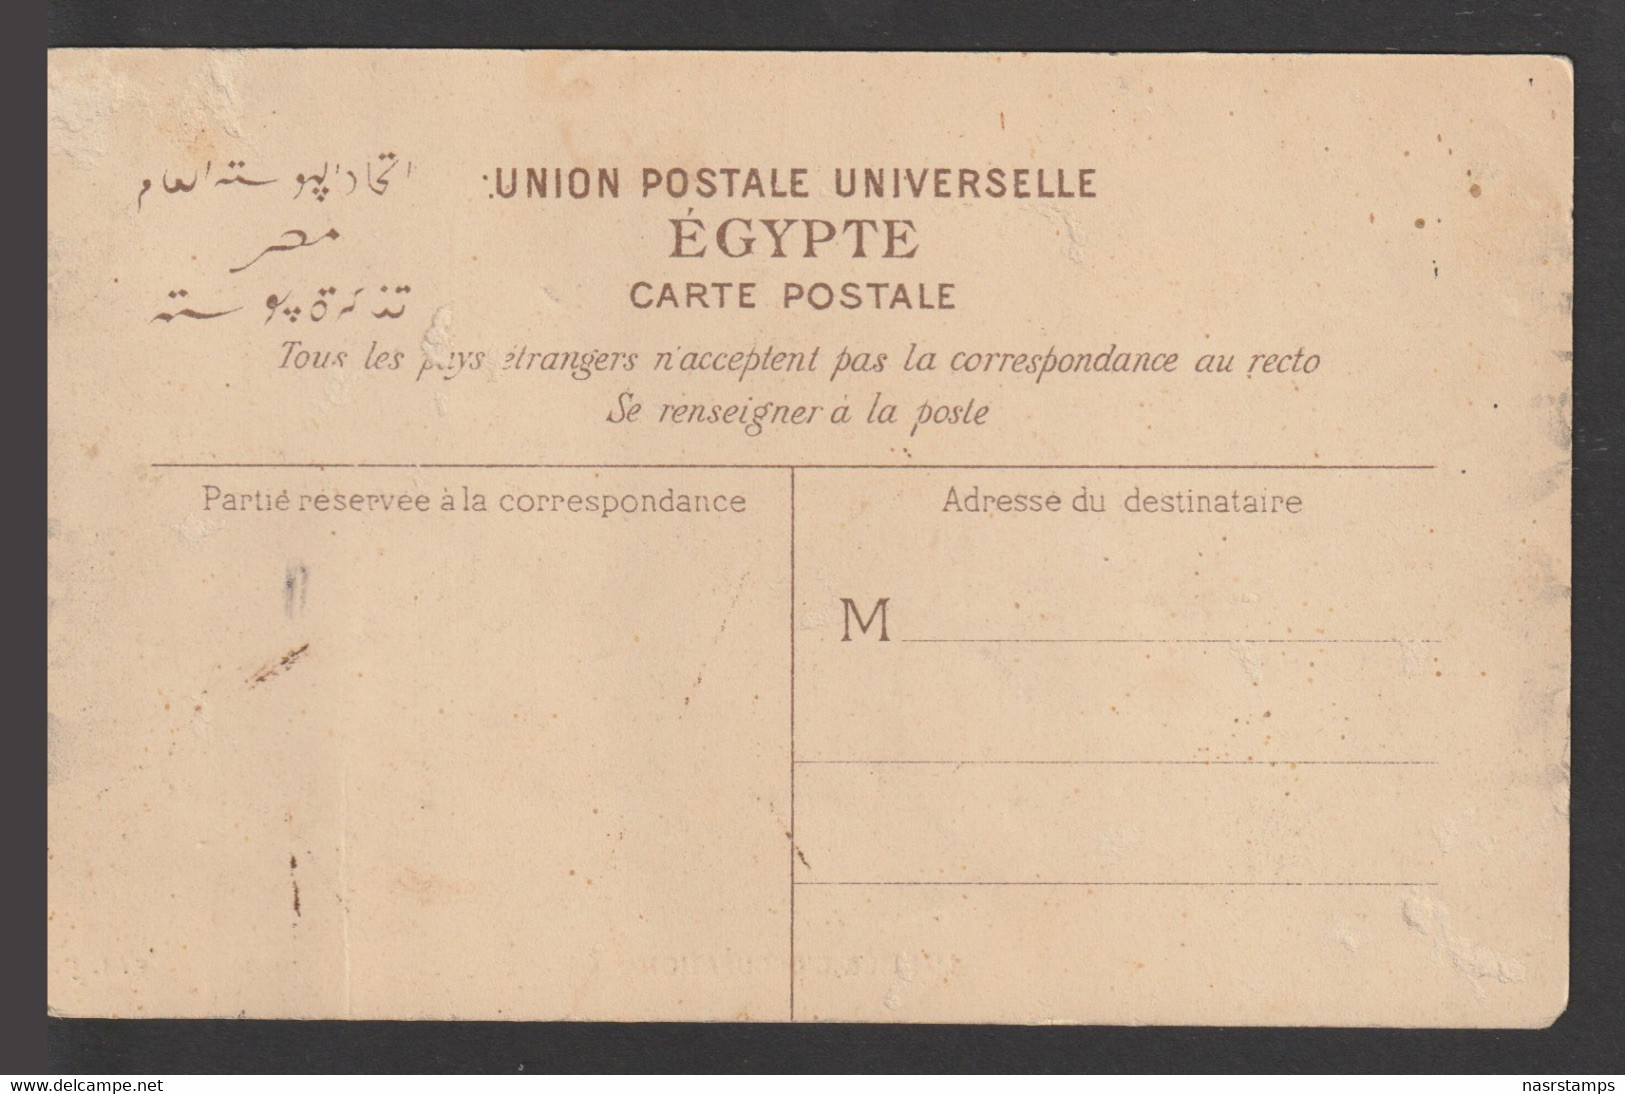 Egypt - Rare - Vintage Post Card - The Occupation Army In Egypt - 1866-1914 Khedivate Of Egypt